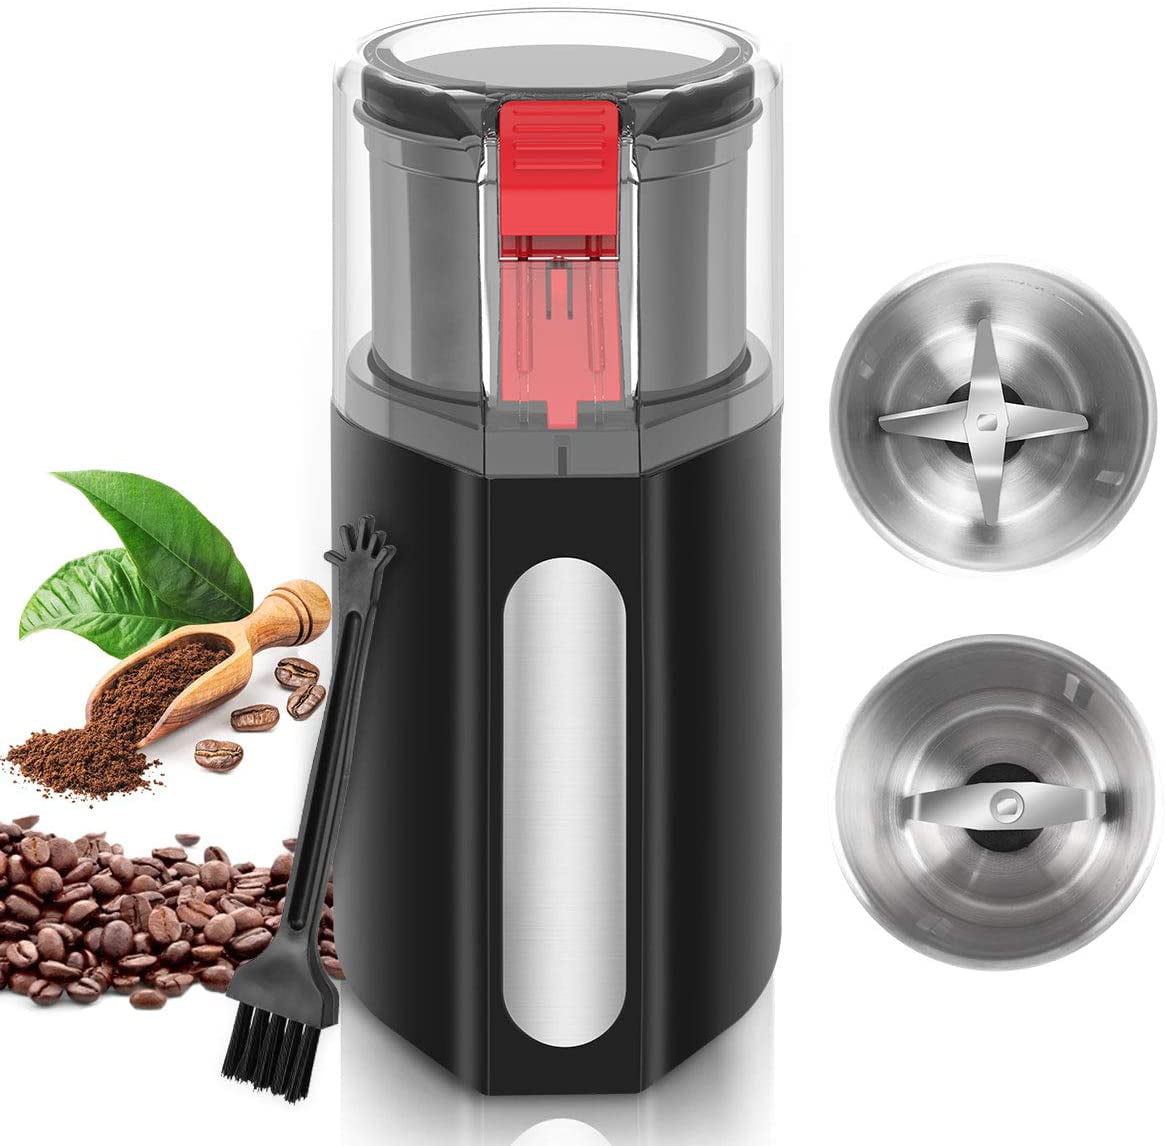 200W Spice Grinder Electric Coffee Grinder 4 Lines of Secutity Protection Cleaning Brush Nut Grinder for Spices and Seeds with 2 Removable 316 Stainless Steel Cups Coffee Grinder